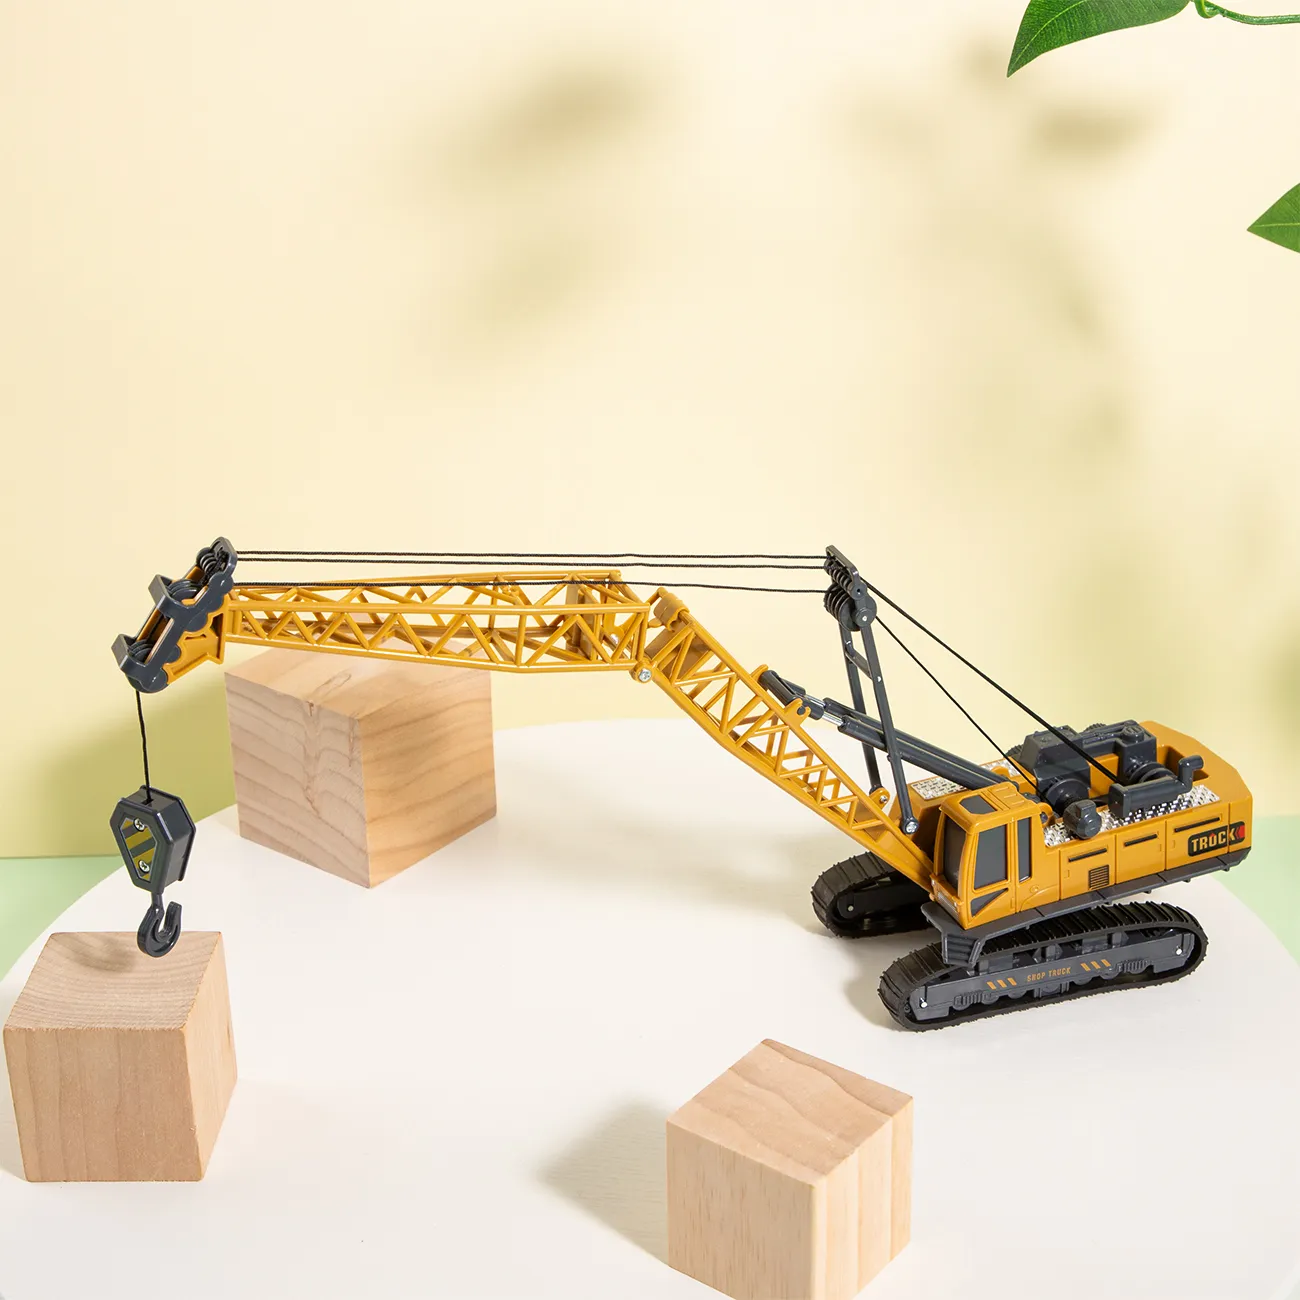 Plastic Crane Toy Car Construction Site Vehicles Toy Classic Model Toy for Boys Gifts Color-A big image 1